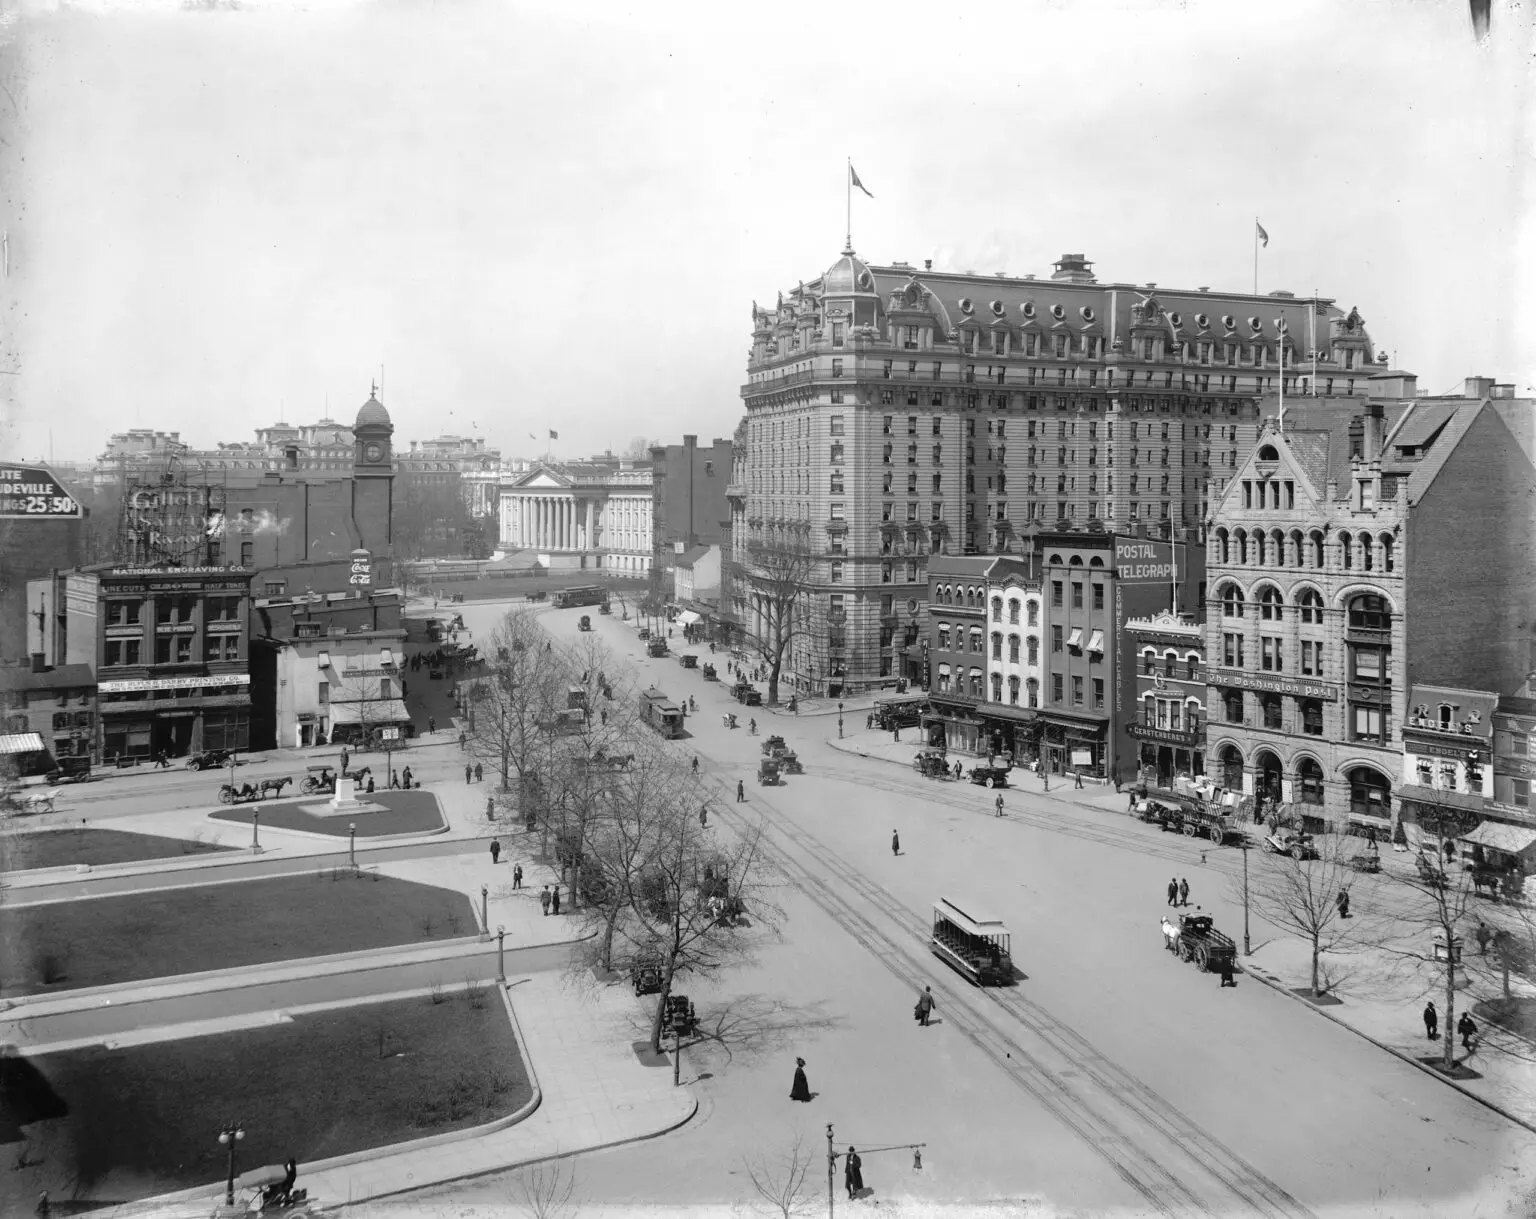 1900s Frozen in Time at 14th and Pennsylvania Avenue